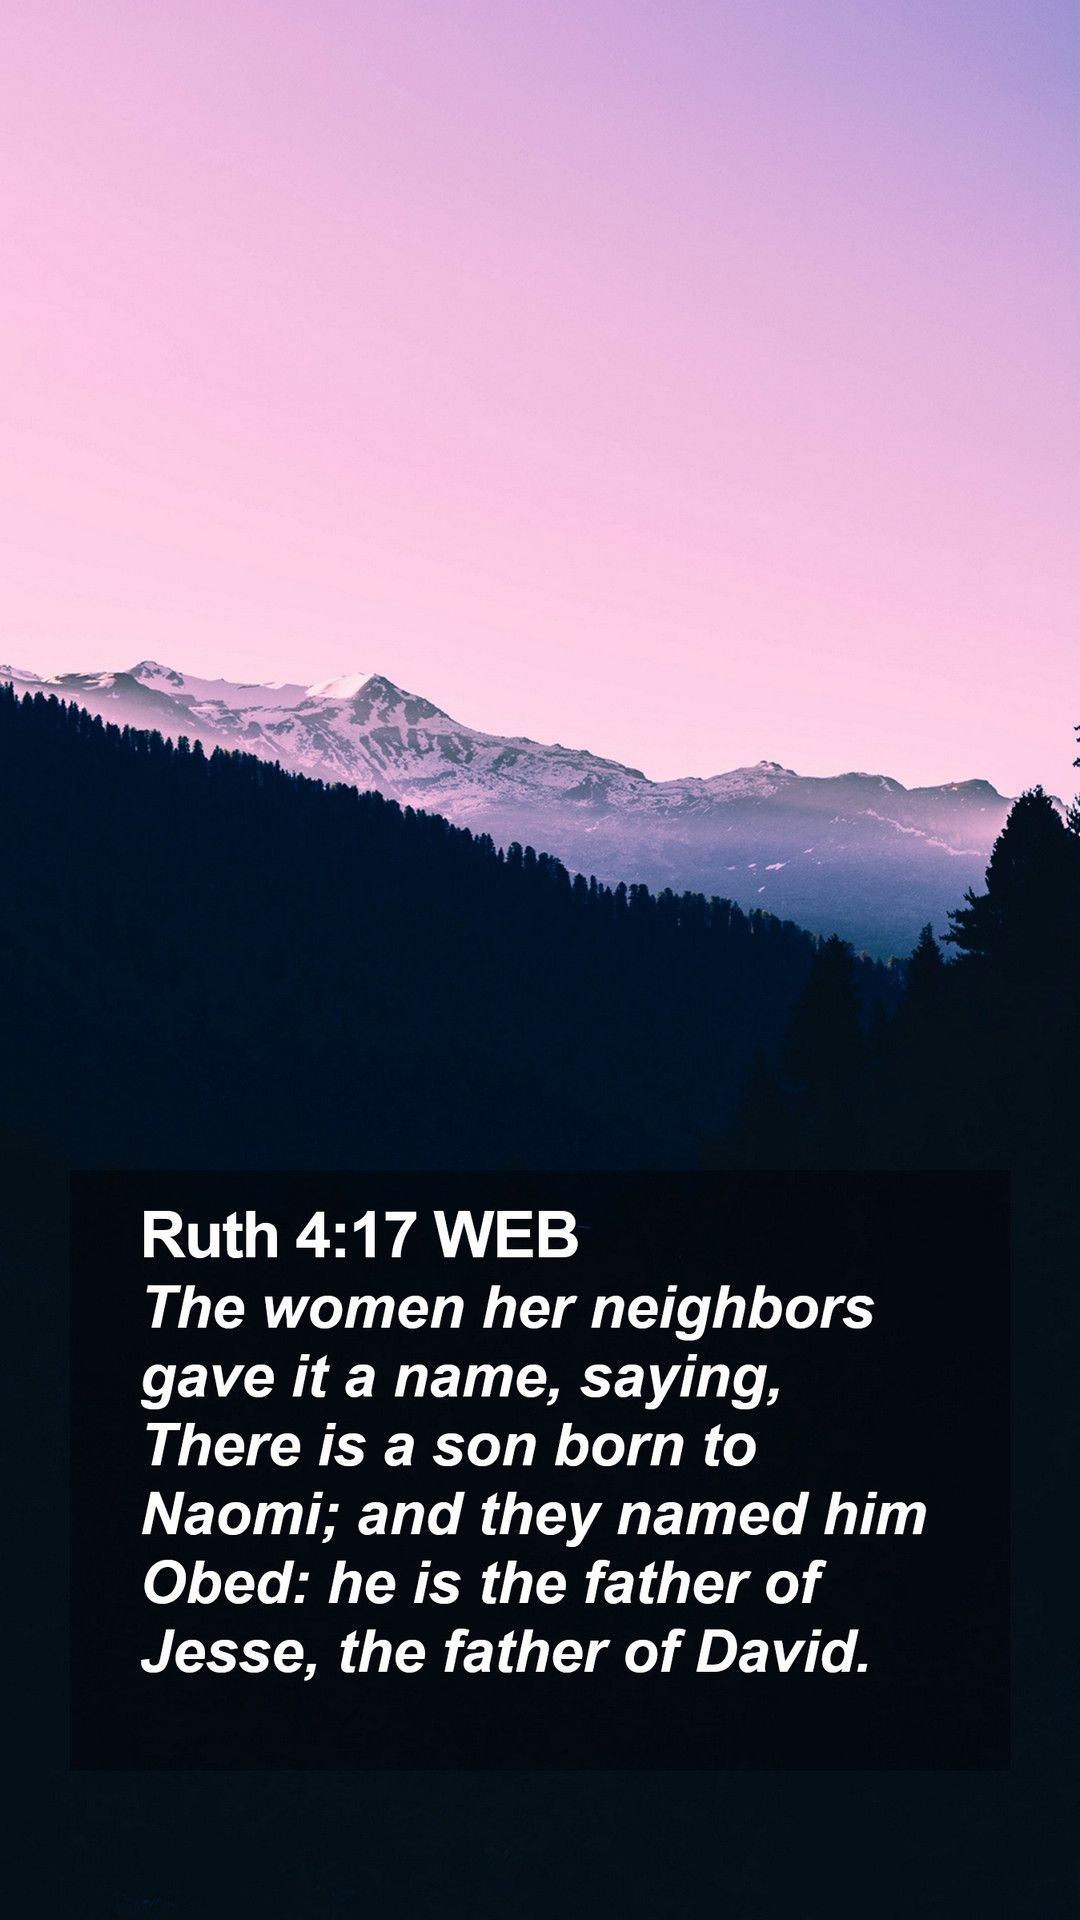 Ruth 4:17 WEB Mobile Phone Wallpaper women her neighbors gave it a name, saying